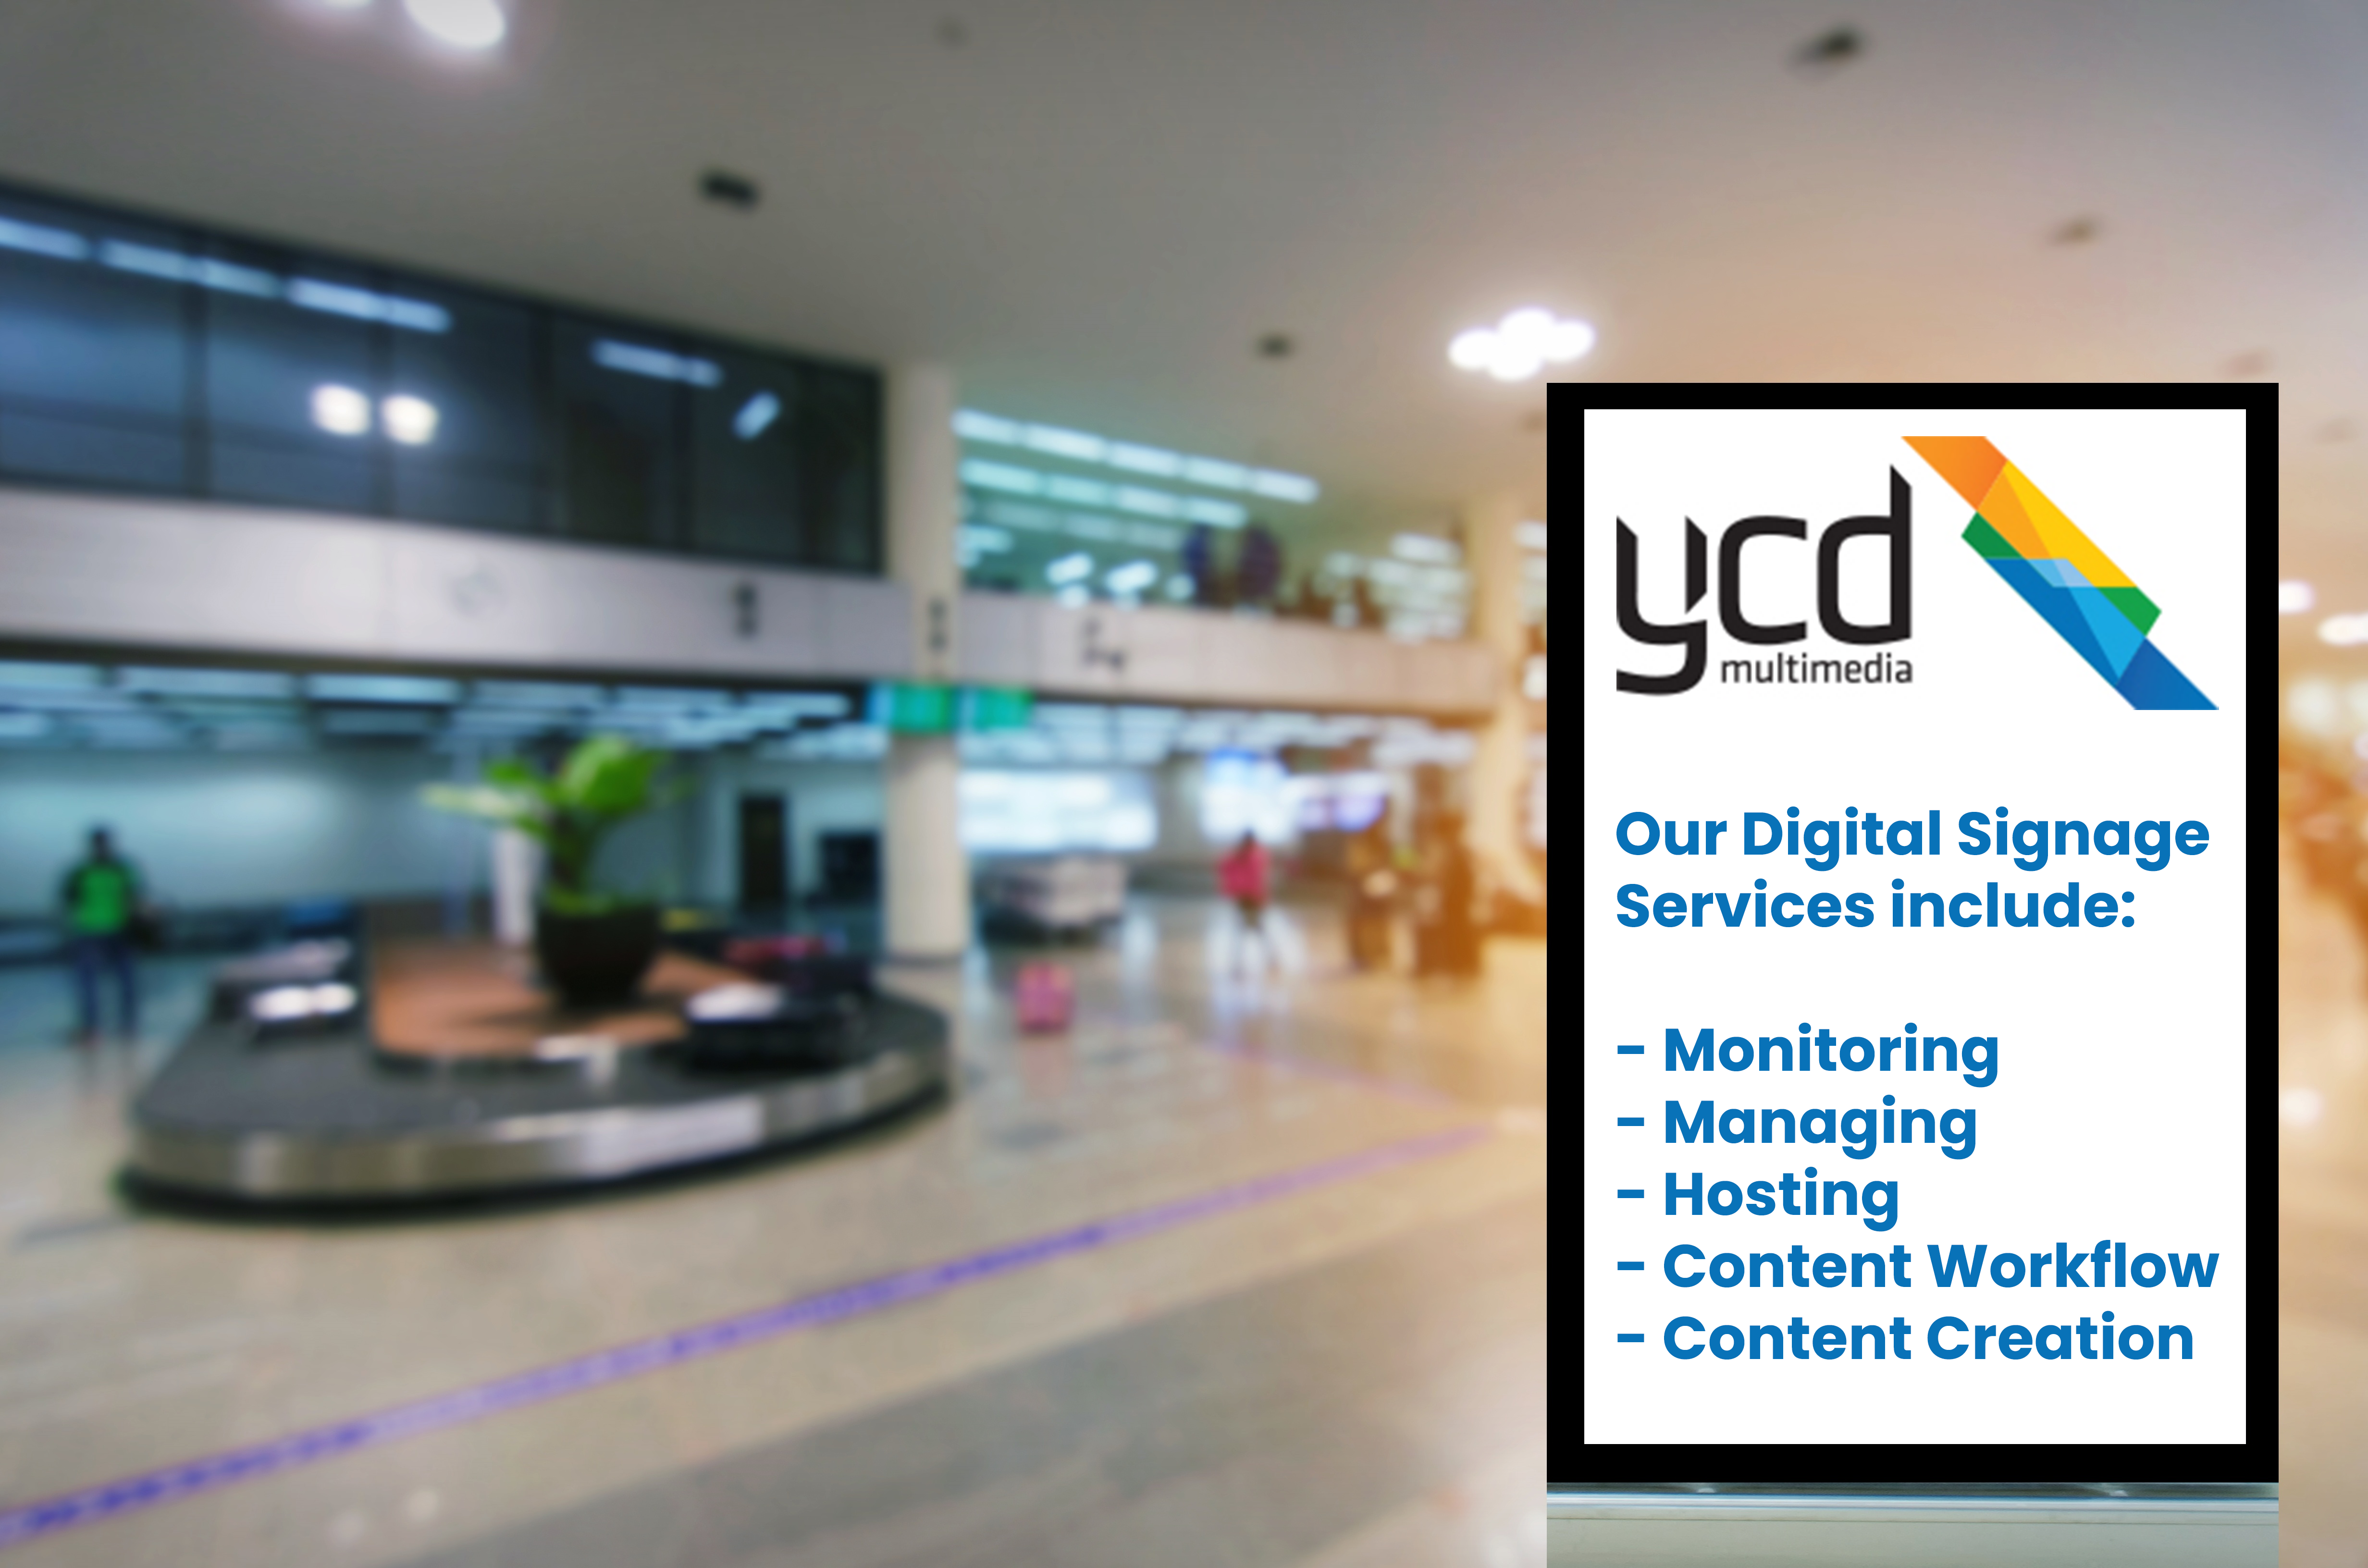 YCD Multimedia Launches 6 New Digital Signage Services.